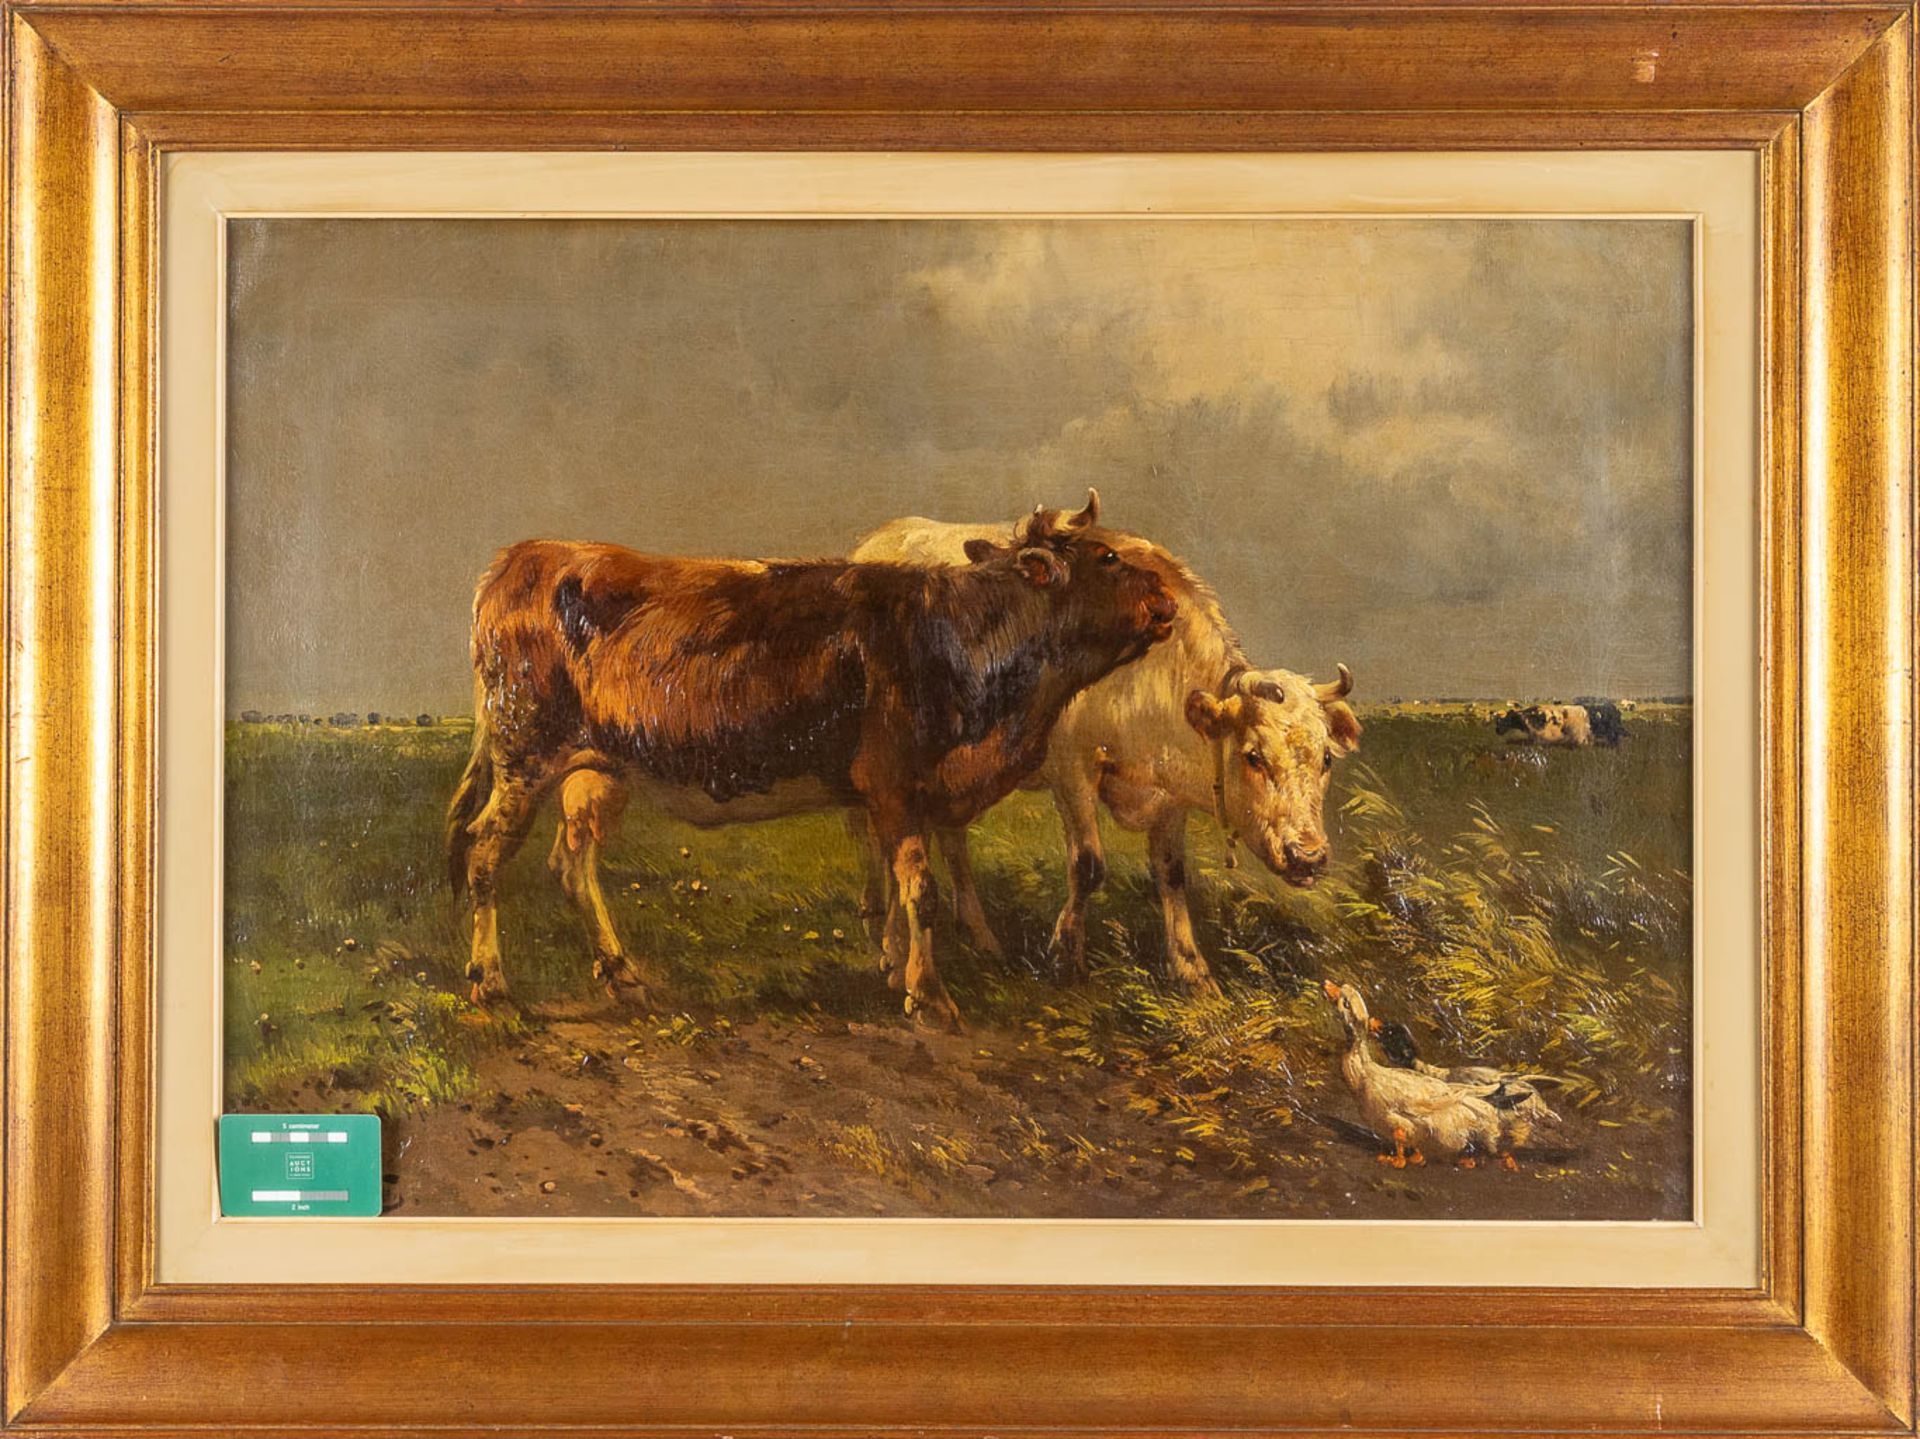 Henry SCHOUTEN (1857/64-1927) 'Pendant paintings, cows in a field' oil on canvas. (W: 80 x H: 55 cm) - Image 2 of 15